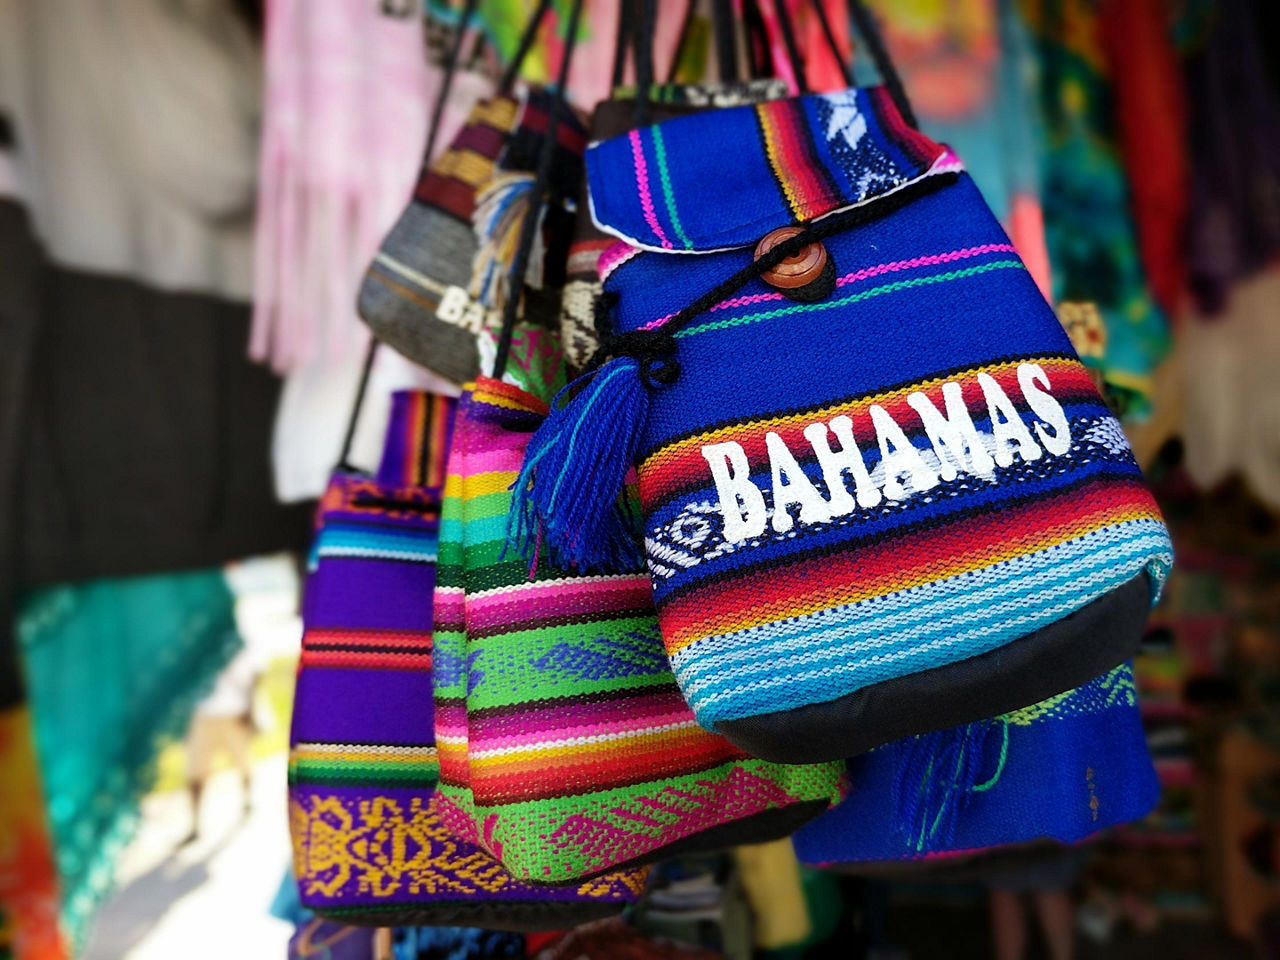 A Souvenir Bag with Bahamas Embroidered on to the Front, Bimini, Bahamas